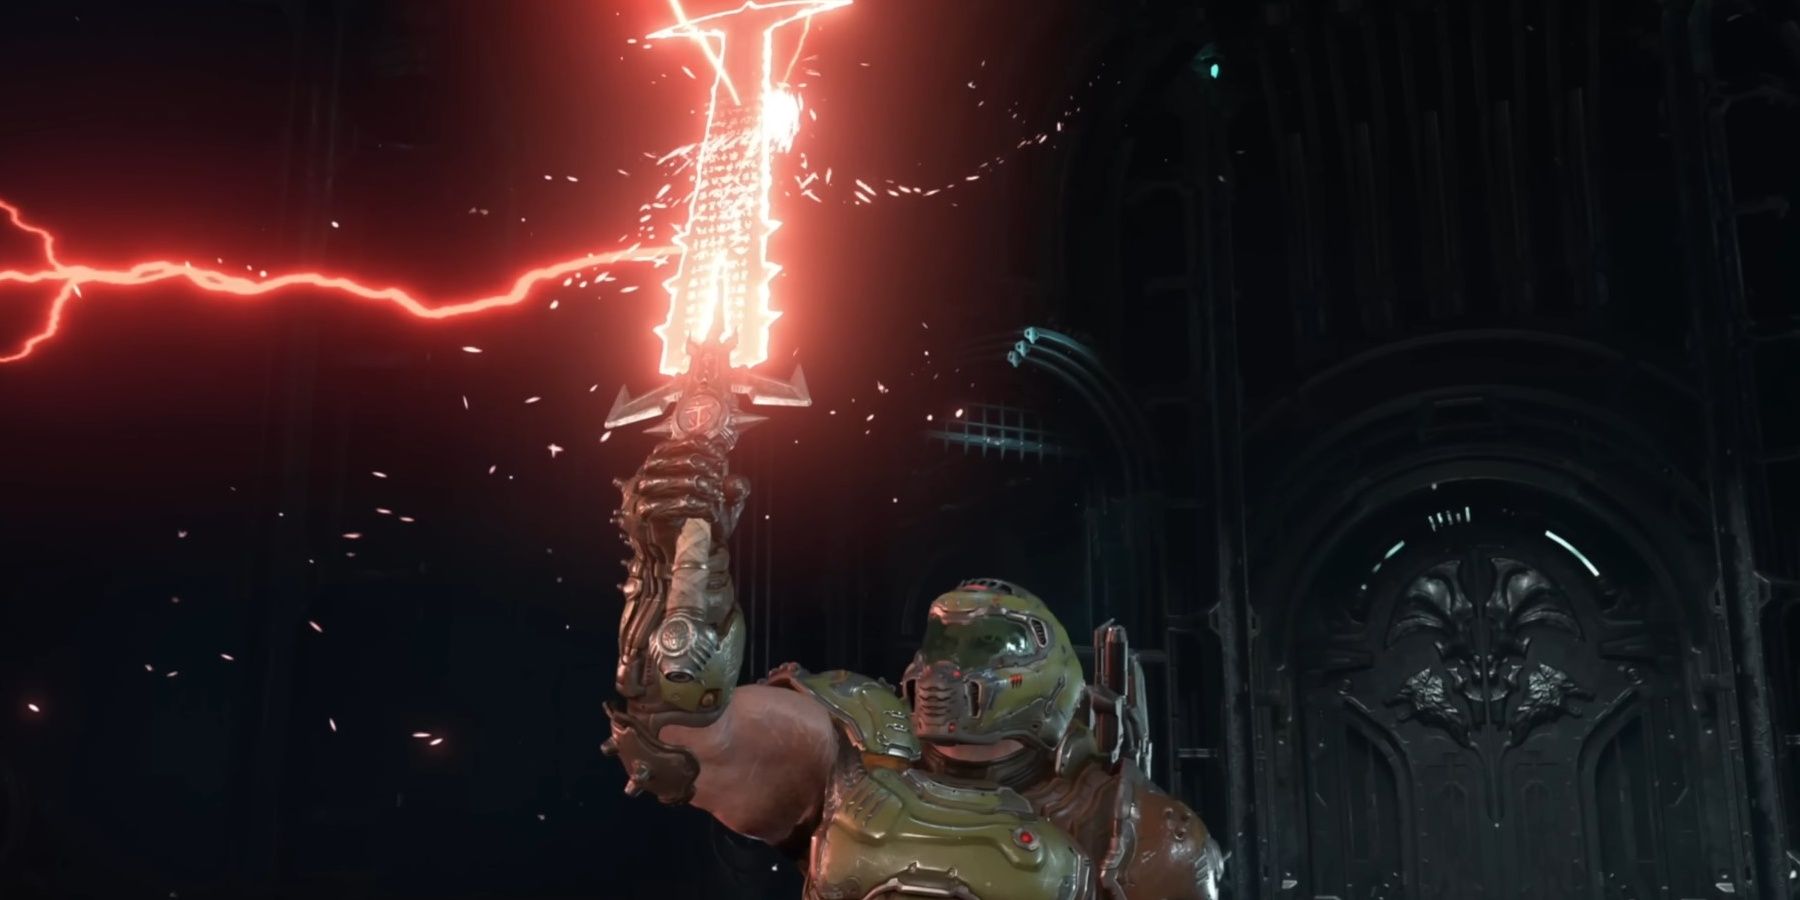 Slayer holding up the Crucible sword from Doom Eternal.